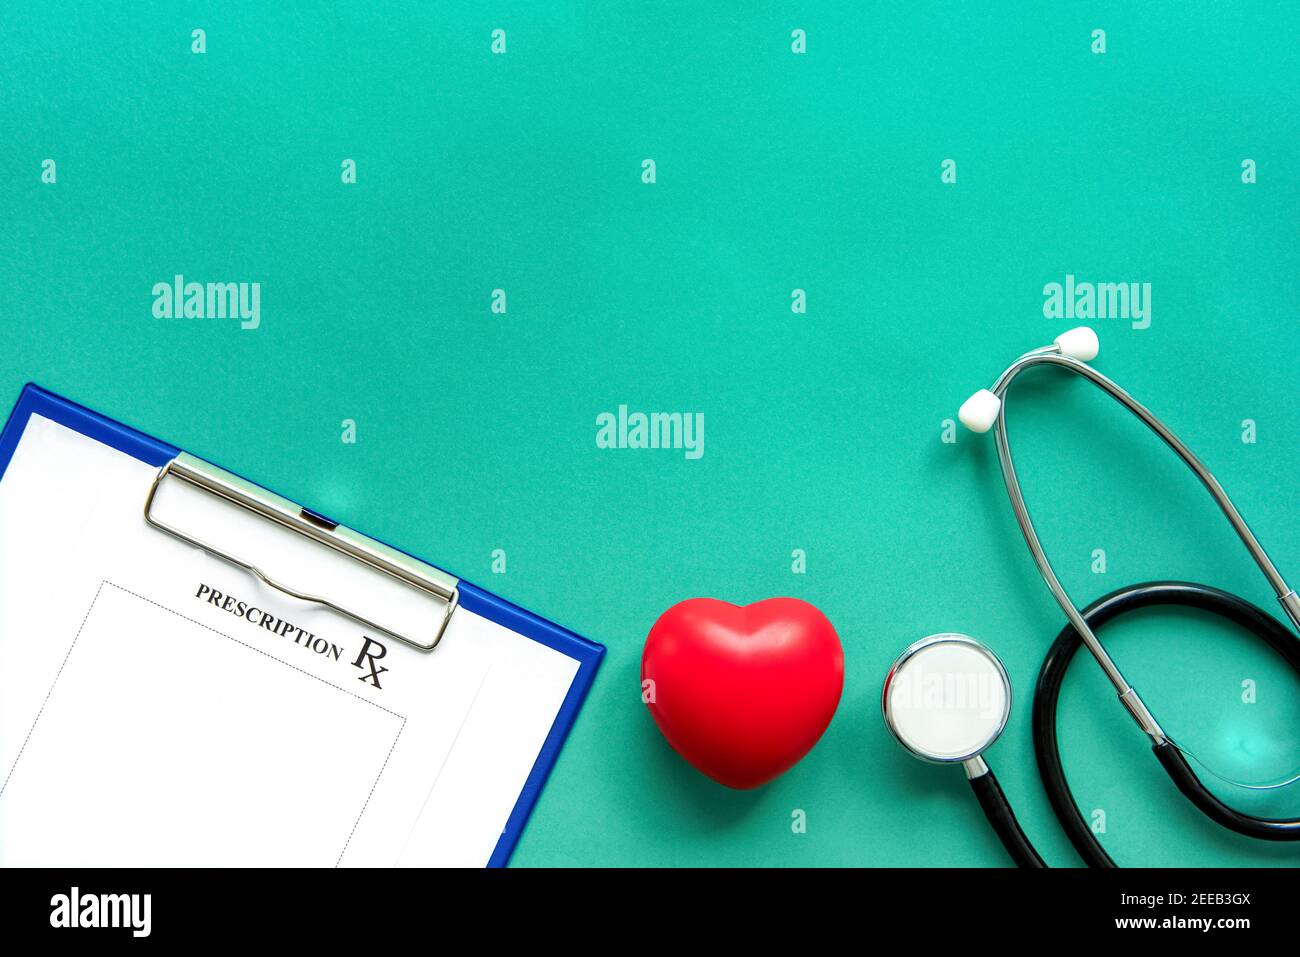 Stethoscope, rx prescription and red heart shape ball on green paper, medical background top view with copy space Stock Photo